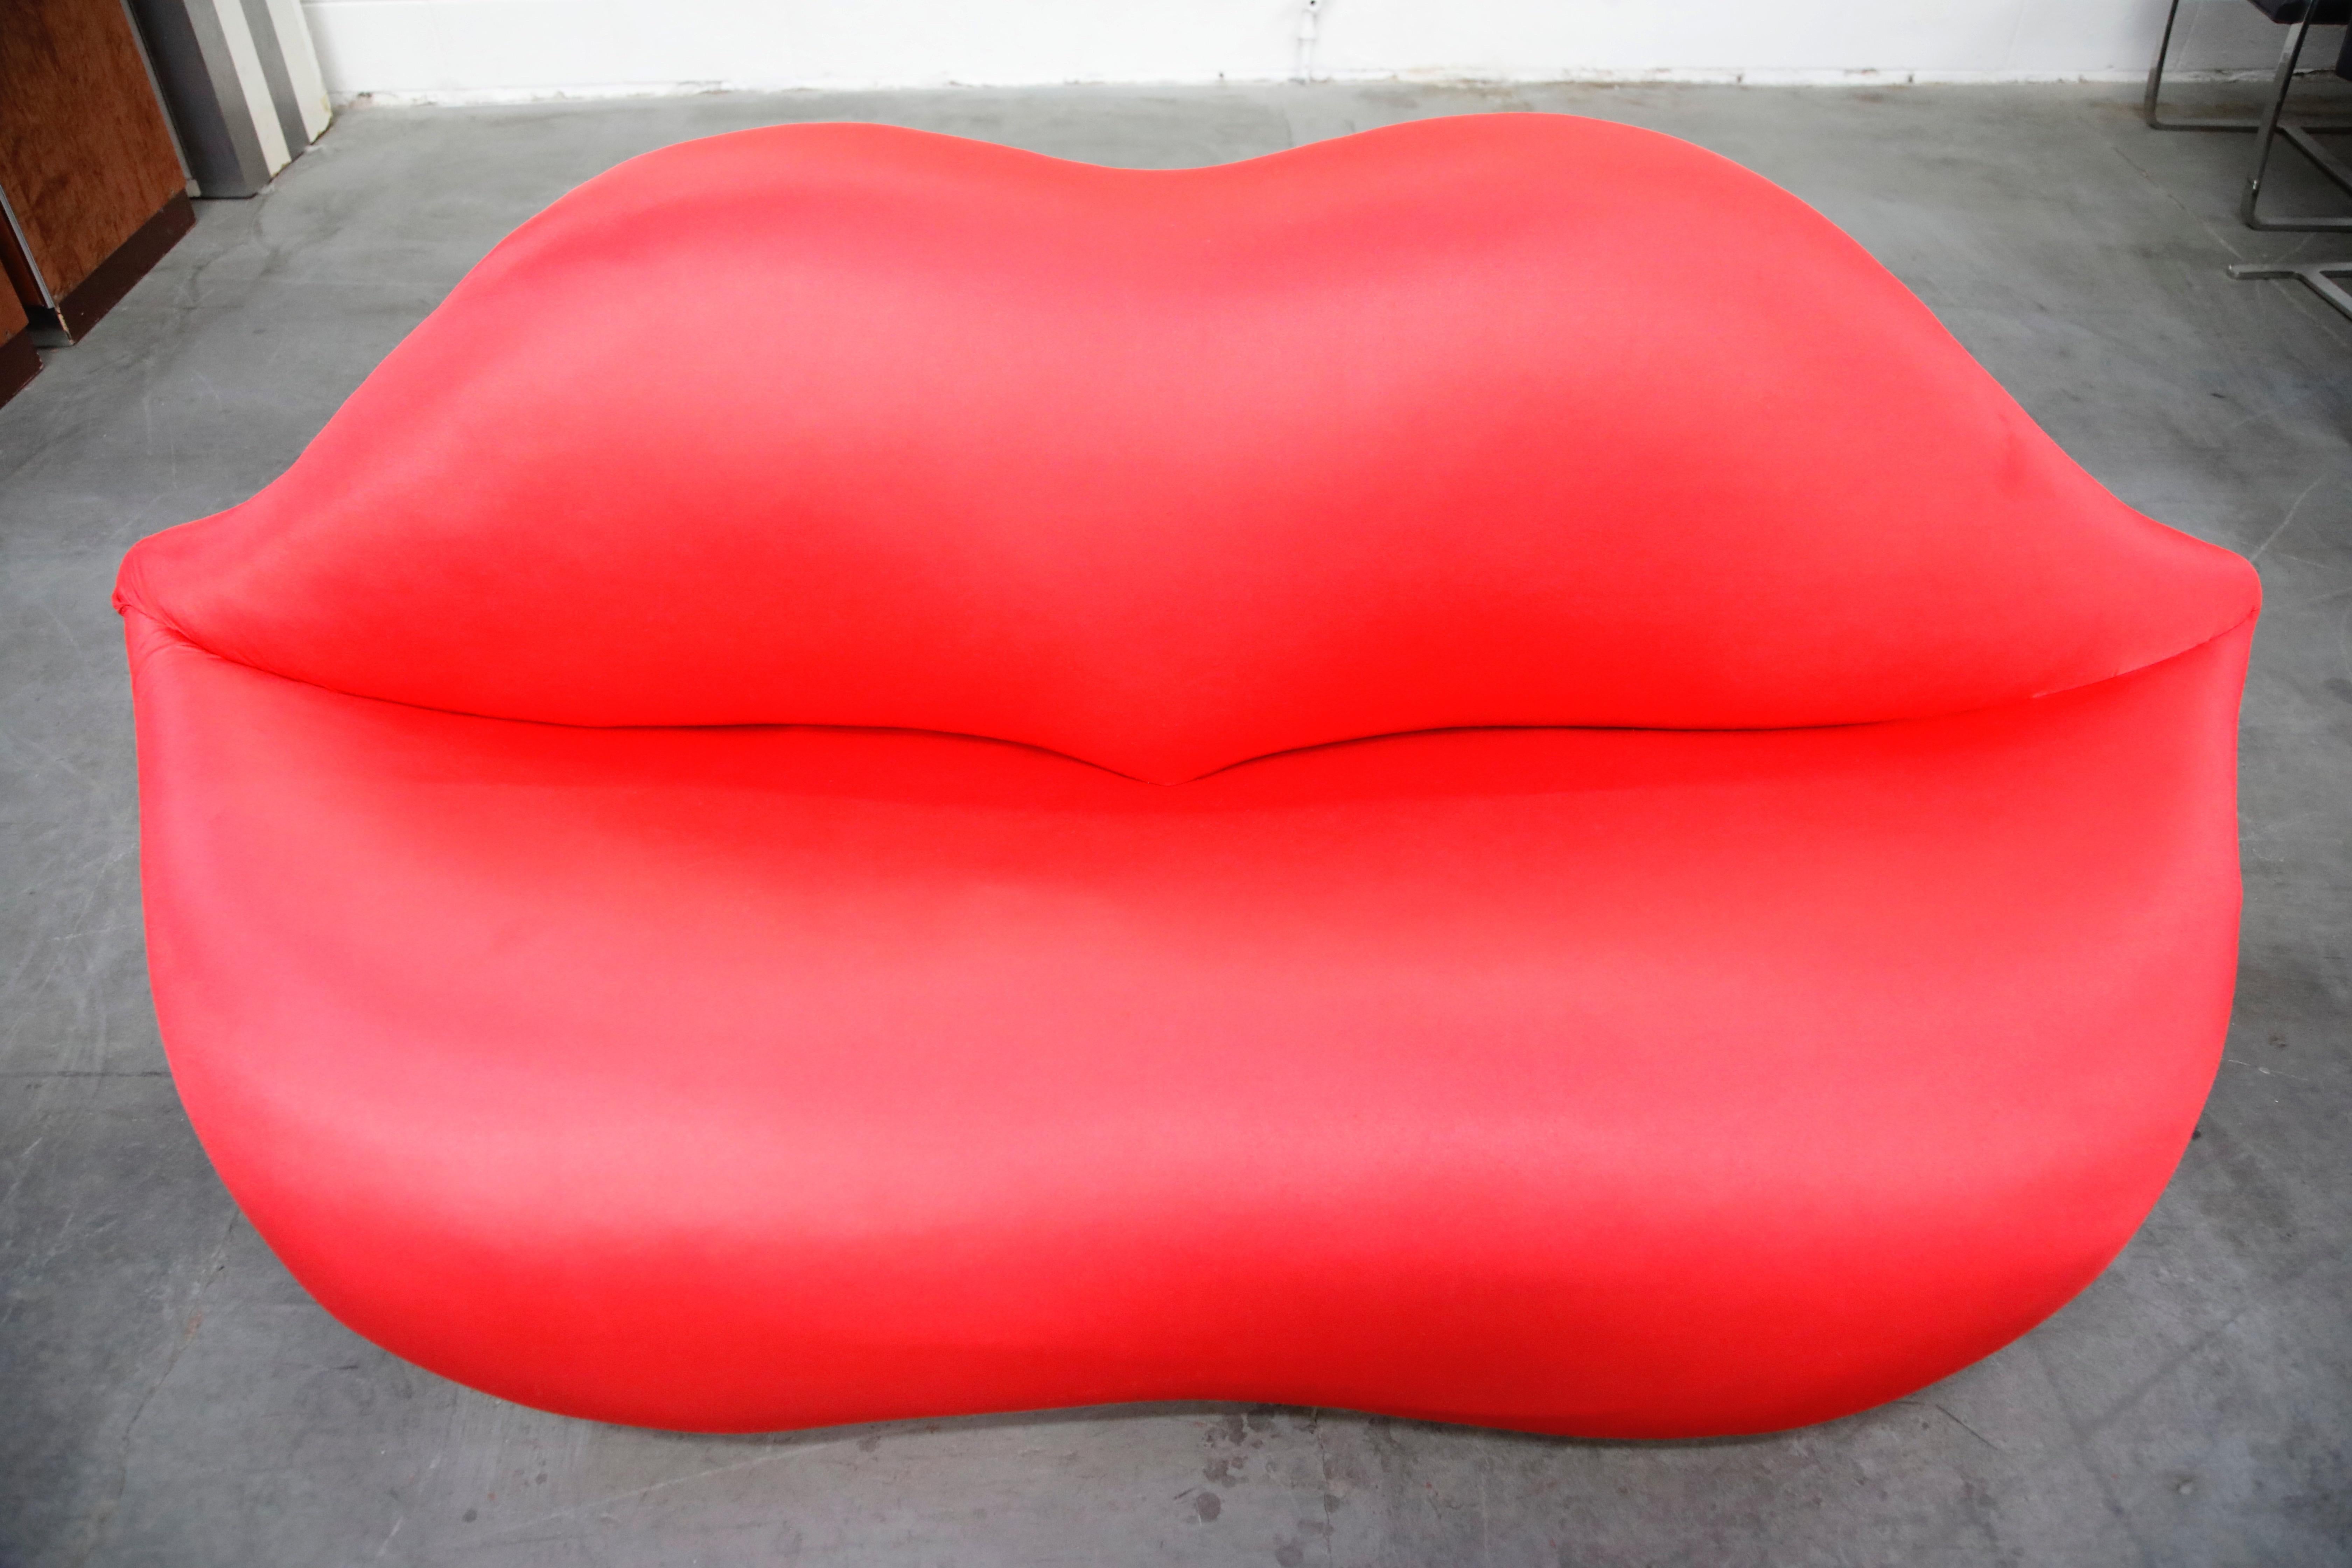 Fabric Limited Edition Bocca Sofa by Studio 65 for Gufram, Signed Dated Numbered, 1986